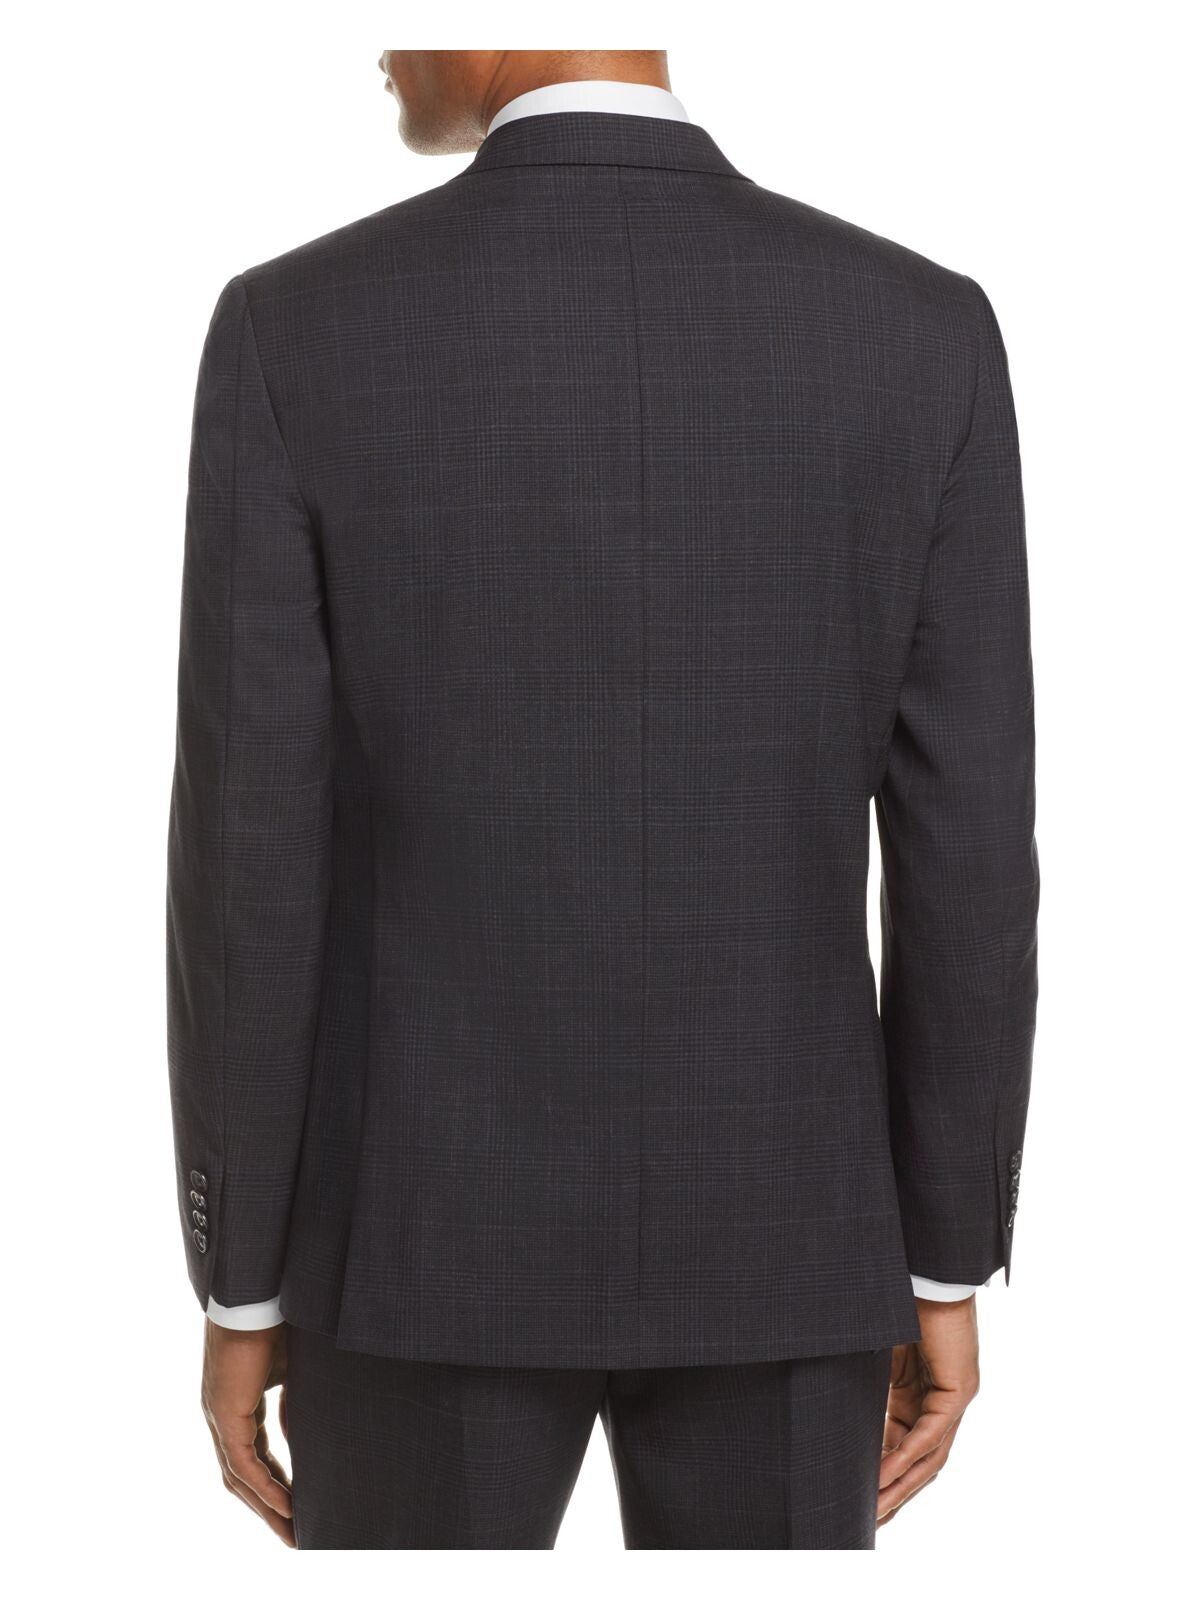 MICHAEL KORS Mens Gray Single Breasted, Stretch, Windowpane Plaid Classic Fit Stretch Suit Separate Blazer Jacket 38R